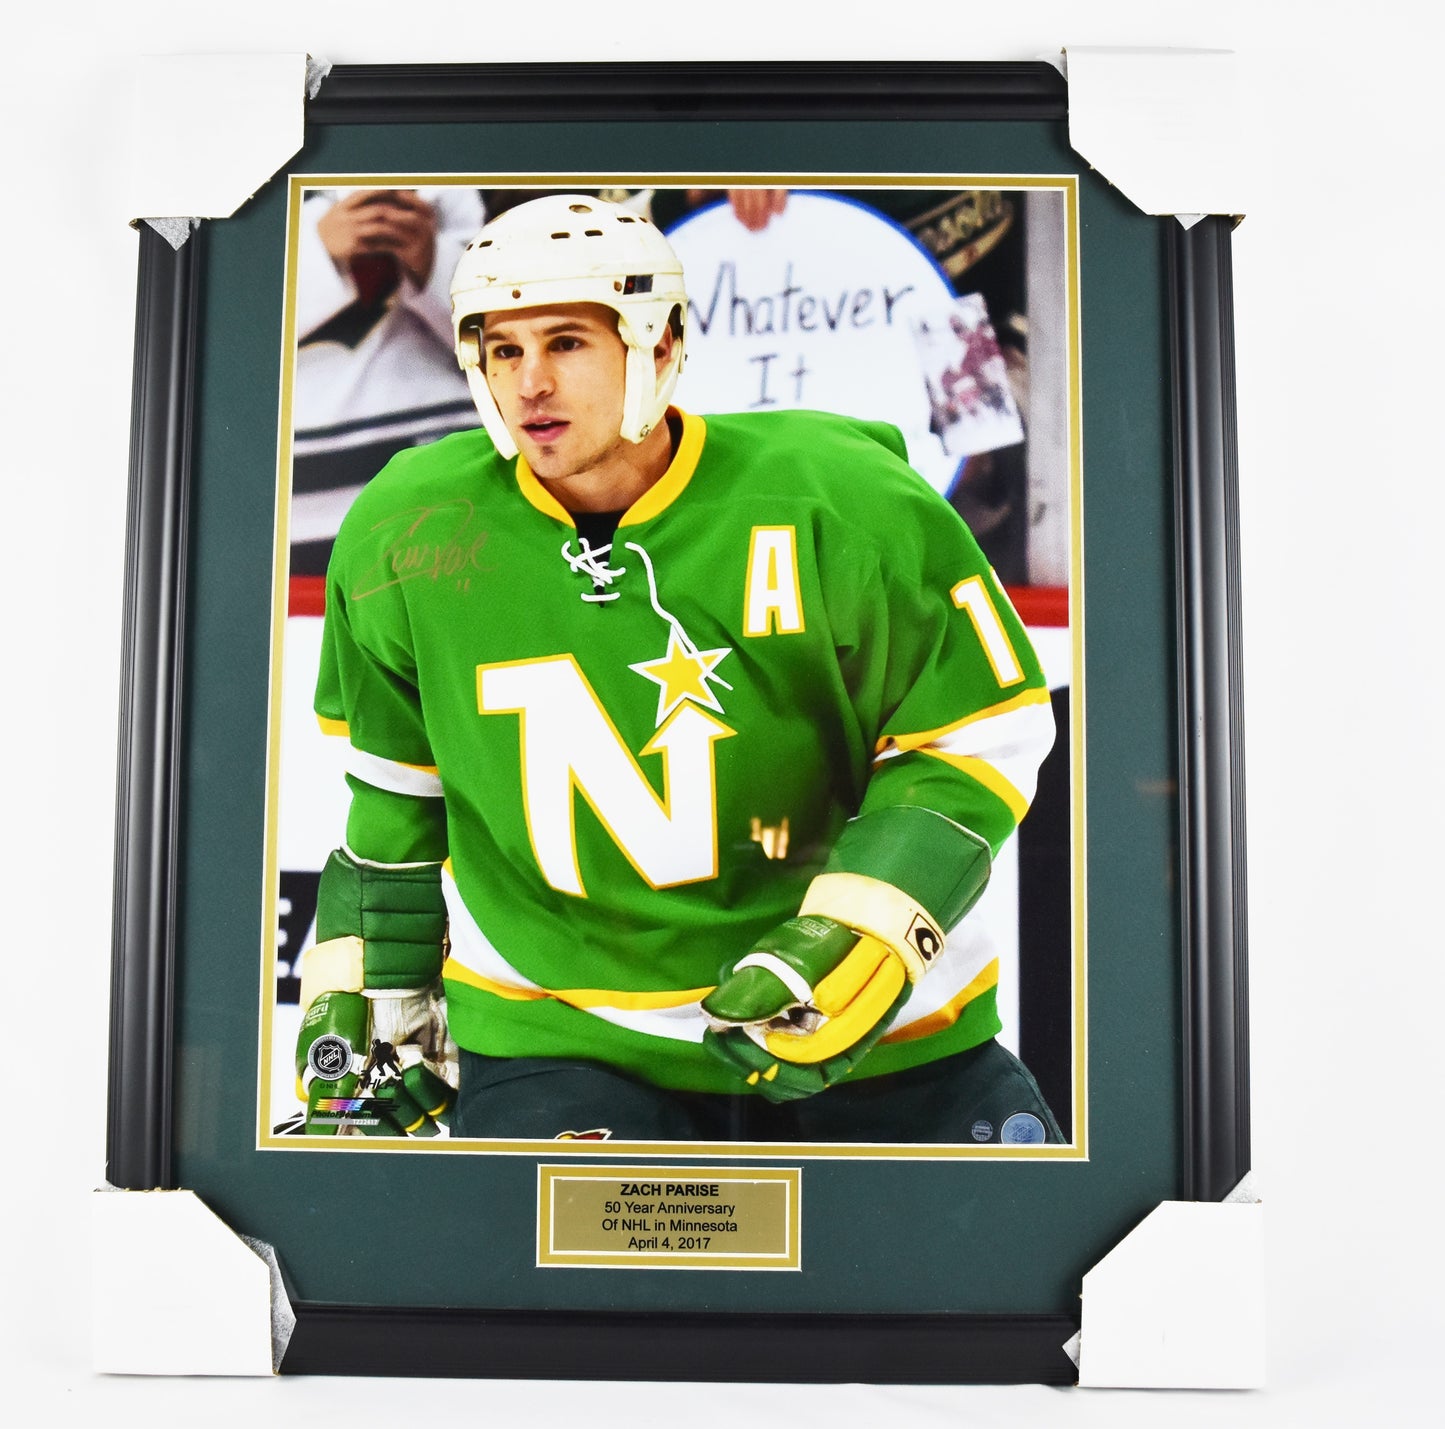 Zach Parise Signed 50 Year Anniversary of NHL in Minnesota Framed Photo*